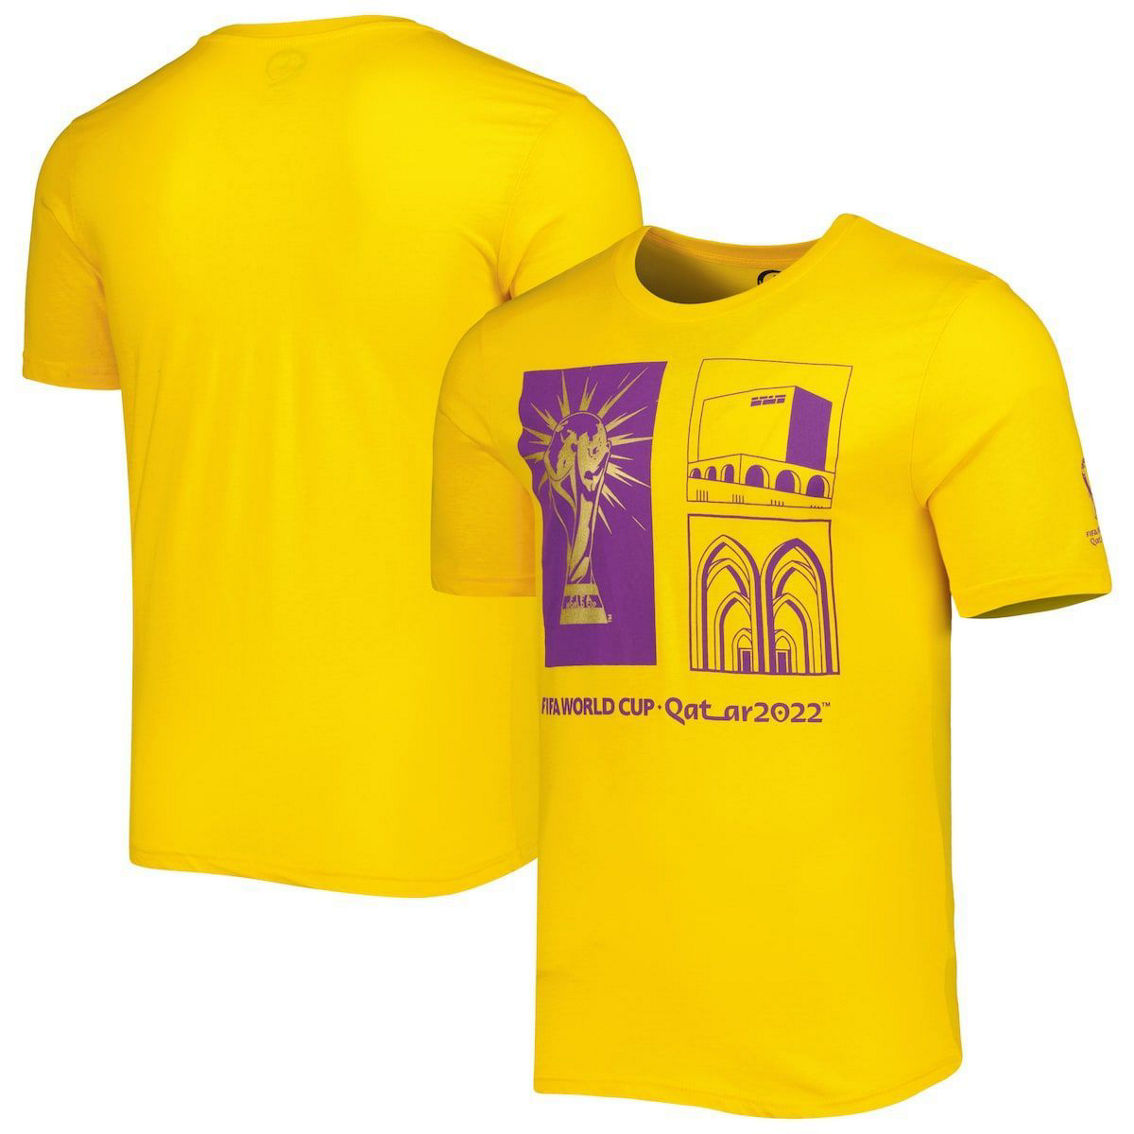 Outerstuff Men's Yellow FIFA World Cup Qatar 2022 Around The World T-Shirt - Image 2 of 4